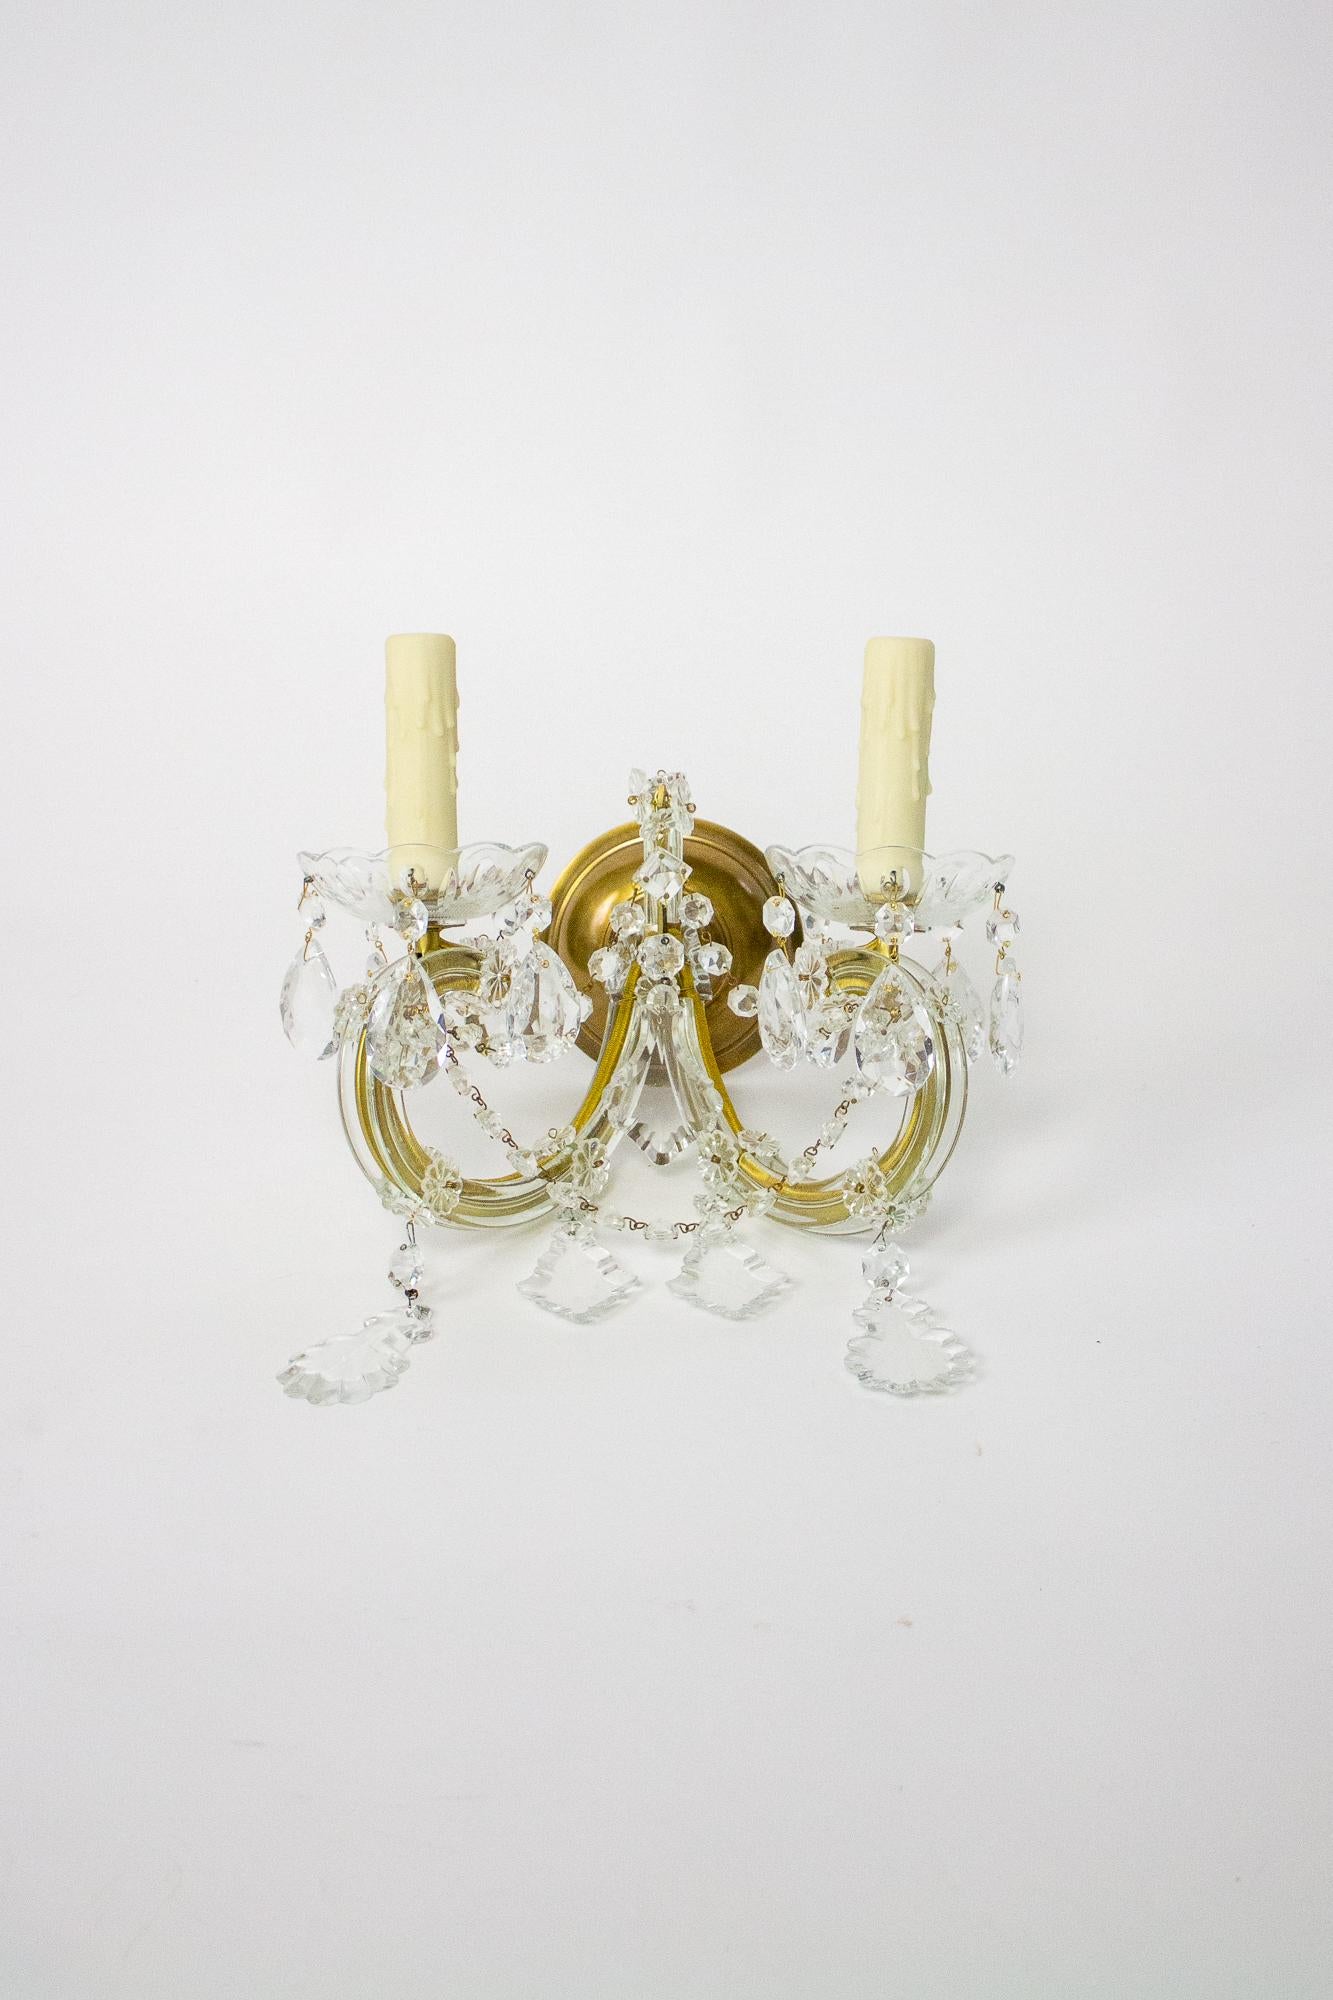 Pretty Maria Theresa Sconces with double curved arms. The arms are steel with a gold finish and are covered with glass tubing and rosettes. They meet in the center with a peak strung with rosettes and a crystal pendalogue. Cast glass bobeches have